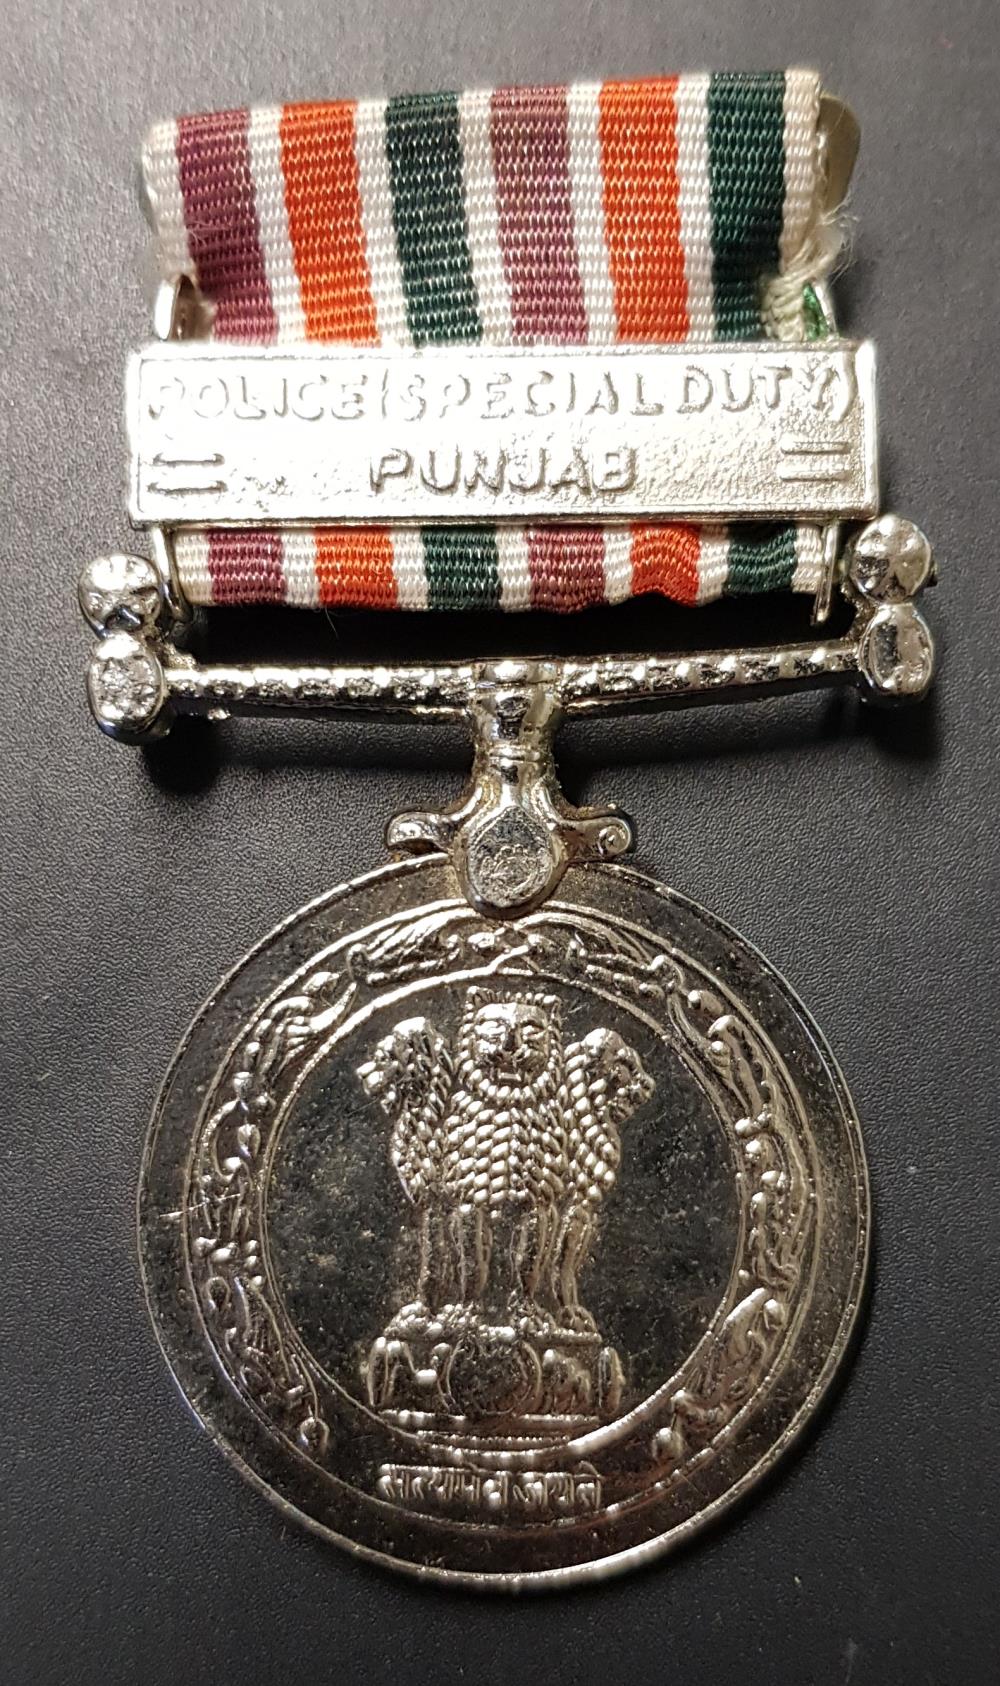 India: Police Special Duty Medal clasp Punjab